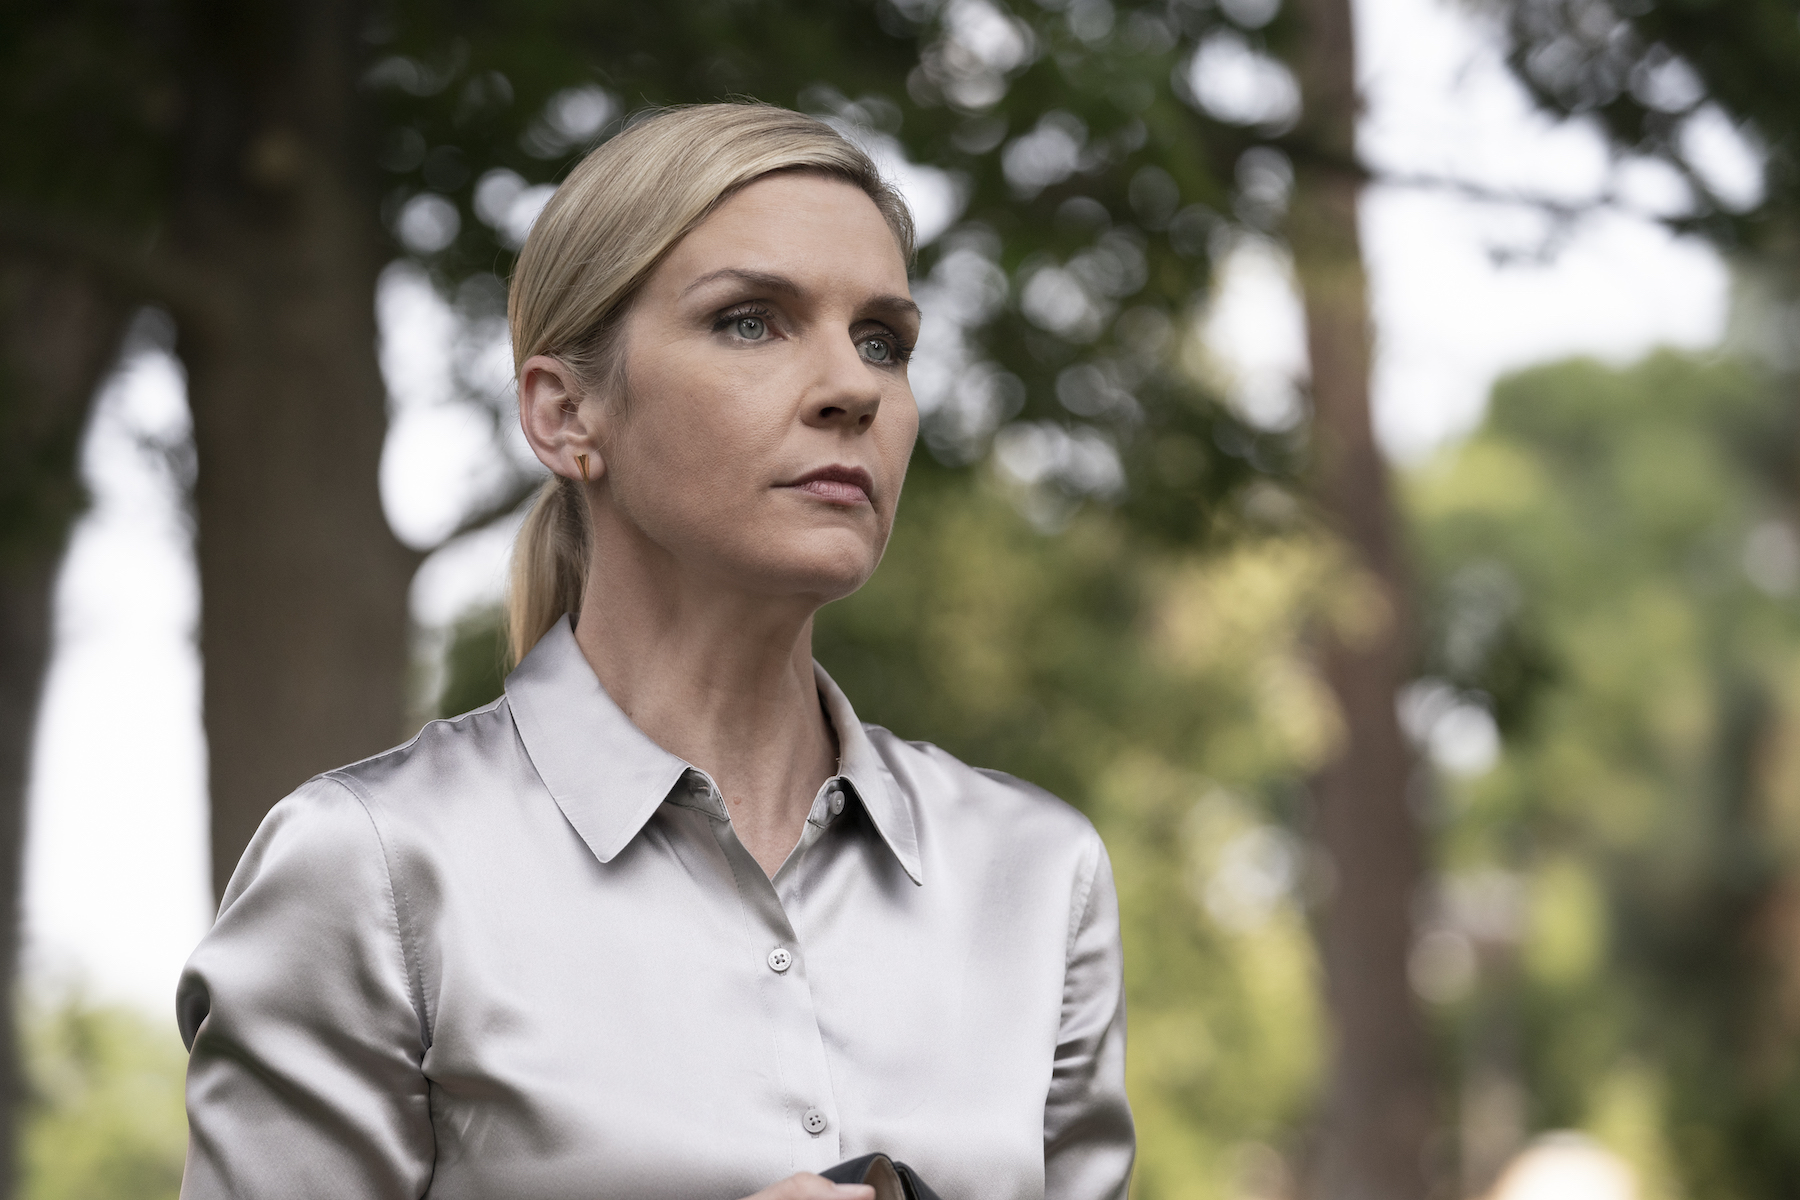 Rhea Seehorn as Kim Wexler - Better Call Saul _ Season 6, Episode 7 - Photo Credit: Greg Lewis/AMC/Sony Pictures Television